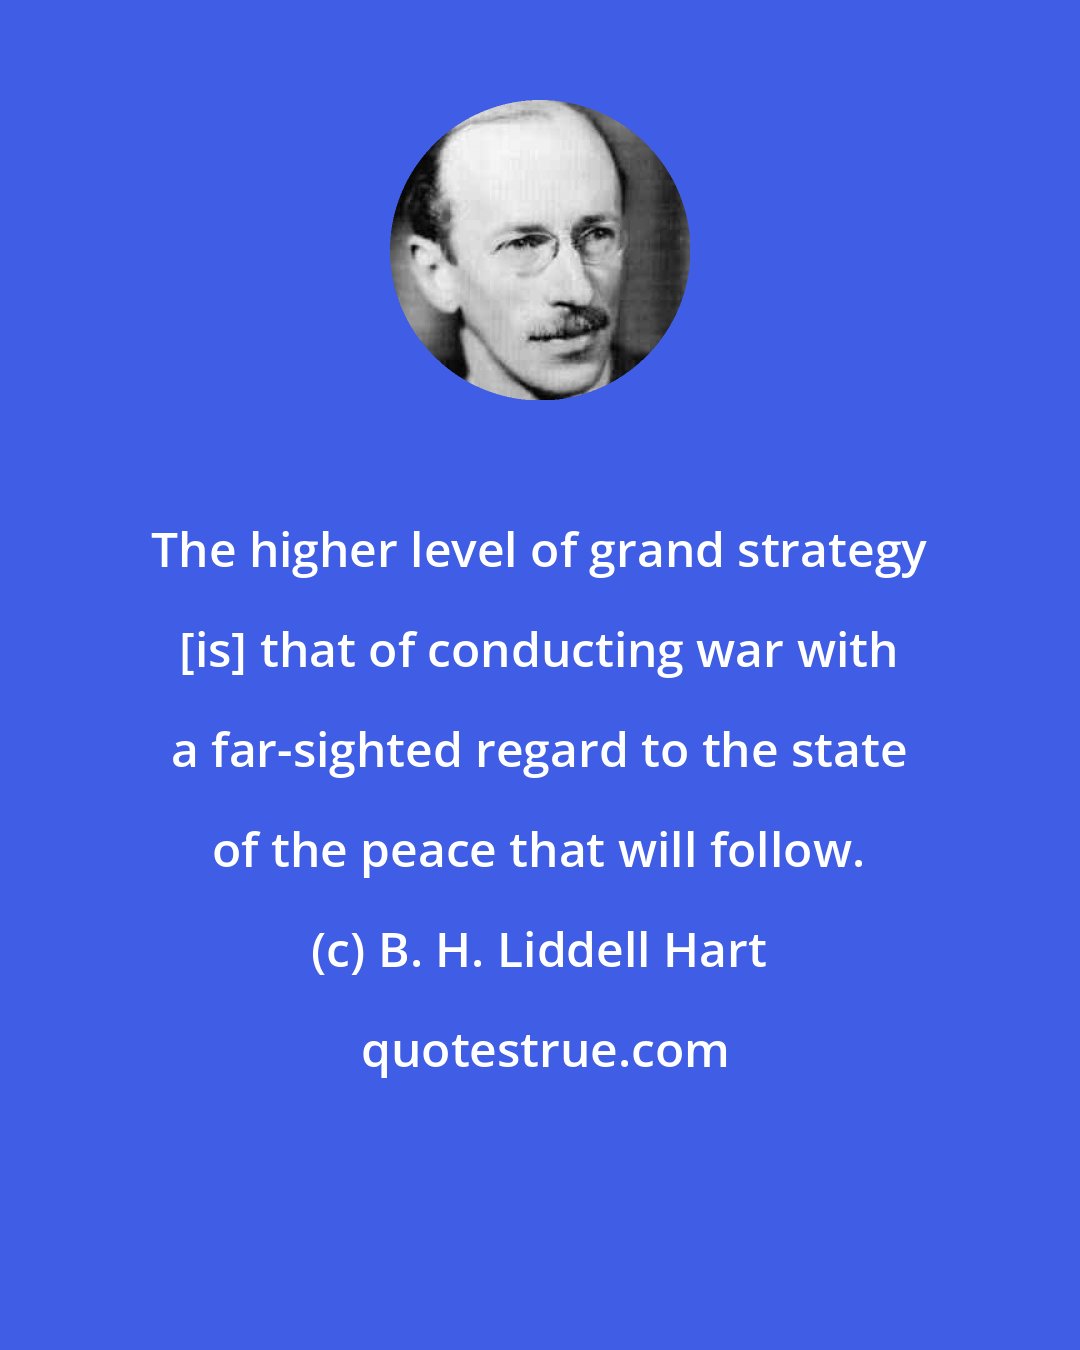 B. H. Liddell Hart: The higher level of grand strategy [is] that of conducting war with a far-sighted regard to the state of the peace that will follow.